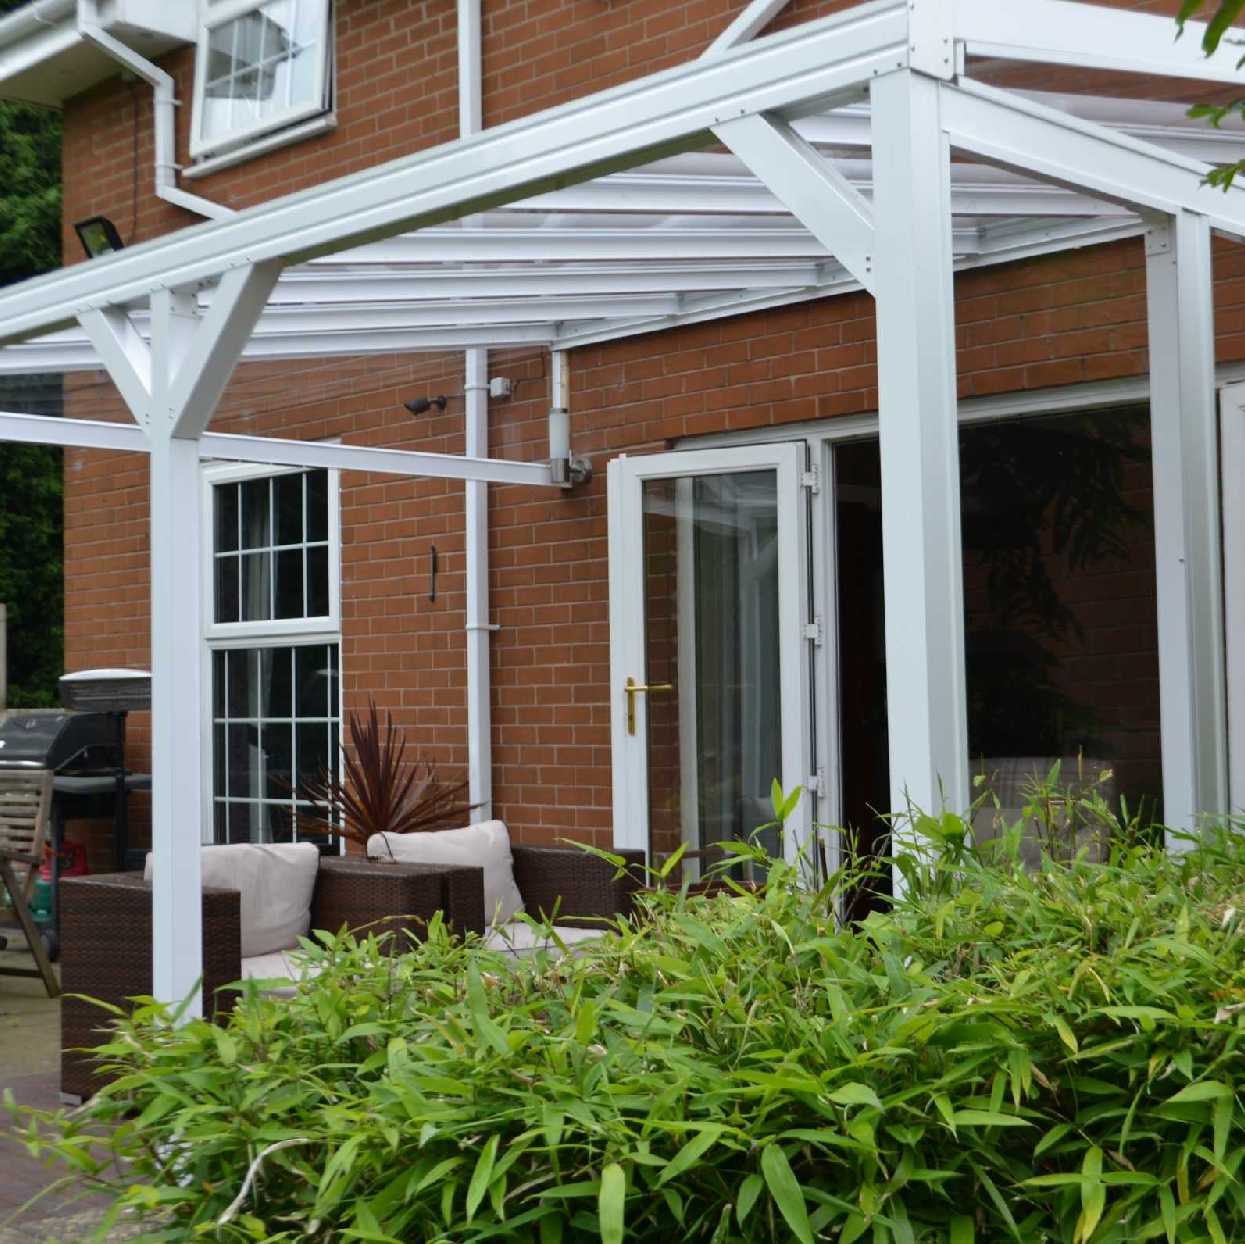 Omega Smart Lean-To Canopy, White UNGLAZED for 6mm Glazing - 2.1m (W) x 2.5m (P), (2) Supporting Posts from Omega Build